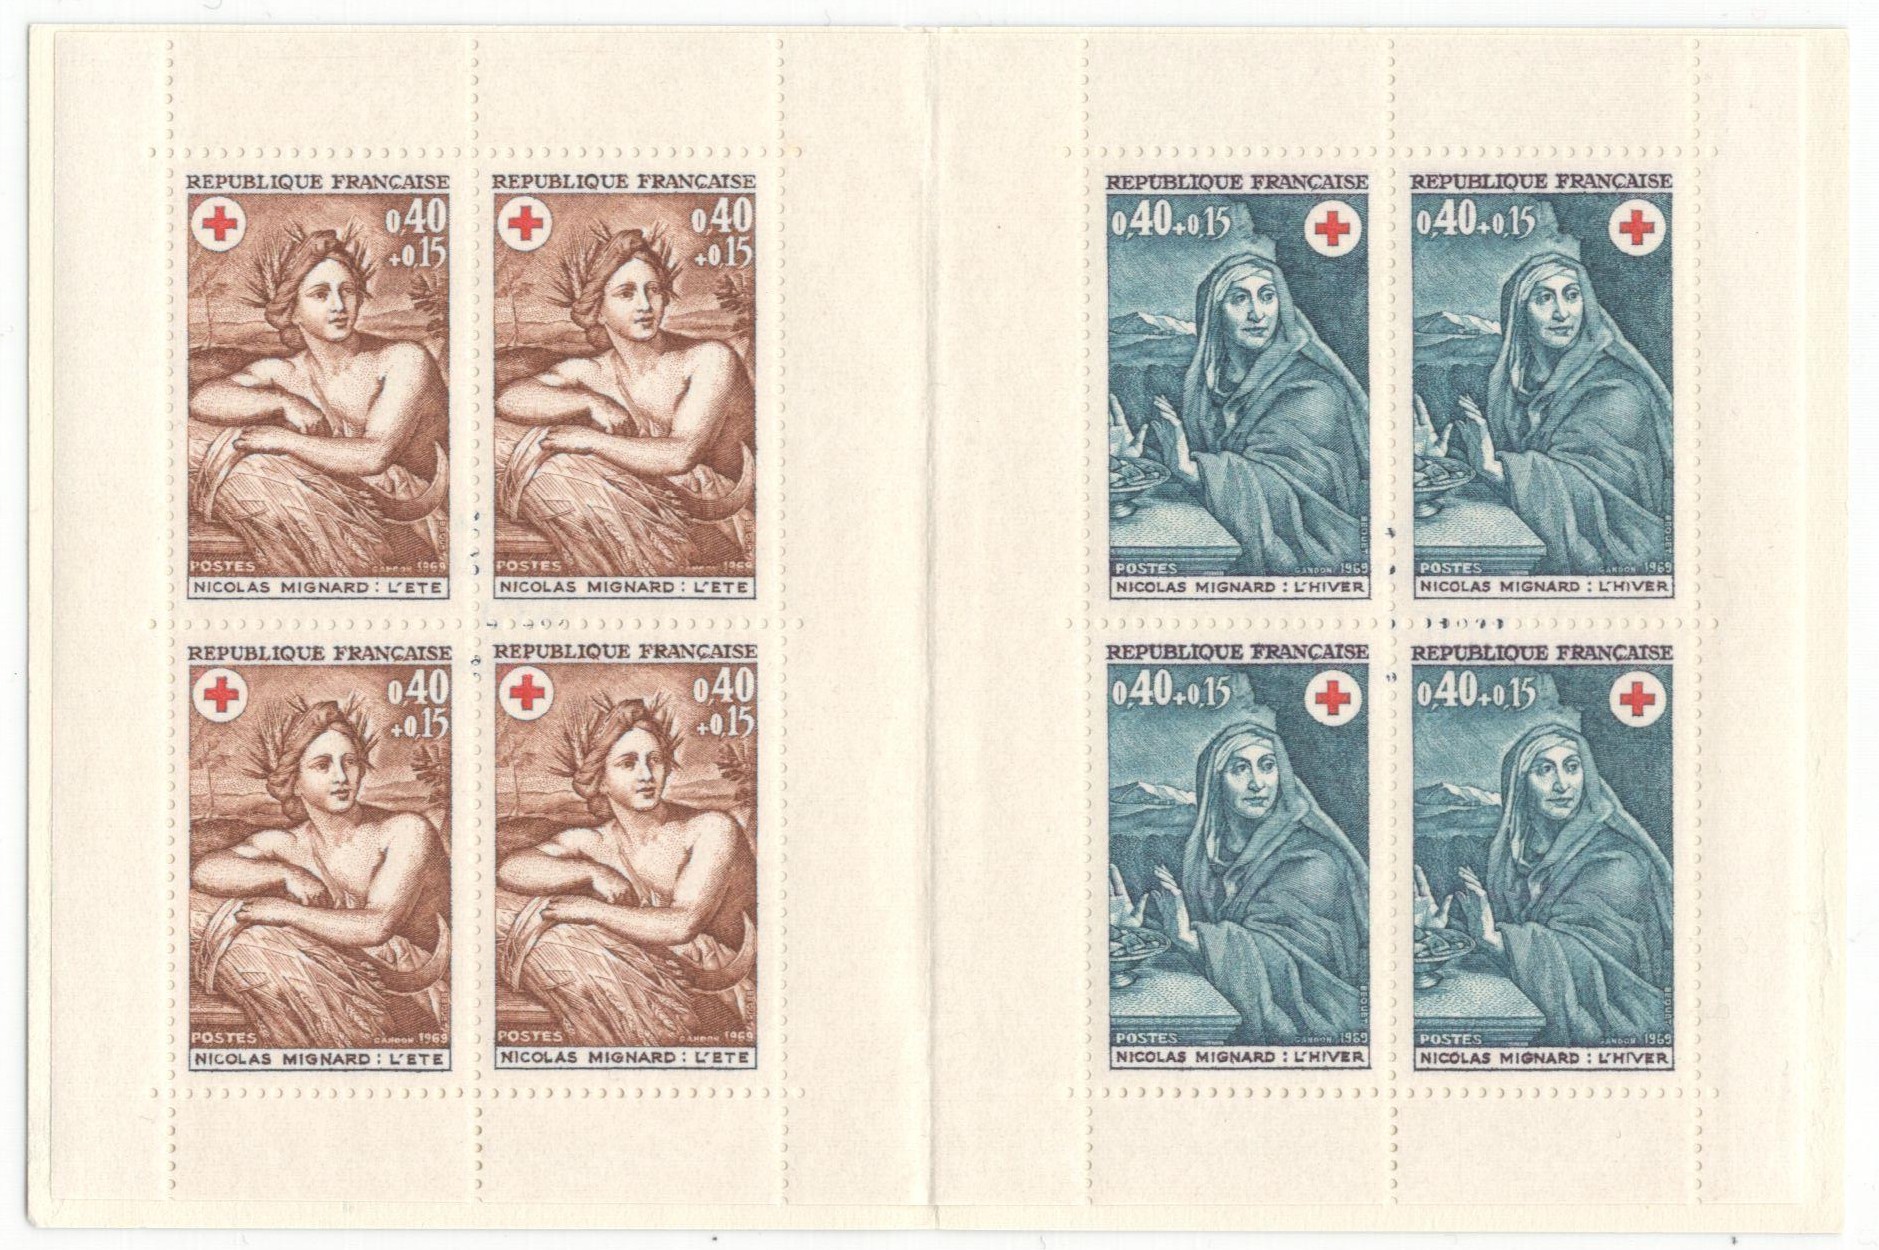 FRENCH RED CROSS STAMP BOOKLETS 1964 1965 1966(2) 1968 1969(2) & FRENCH RED CROSS CHARITY STAMPS - Image 10 of 11